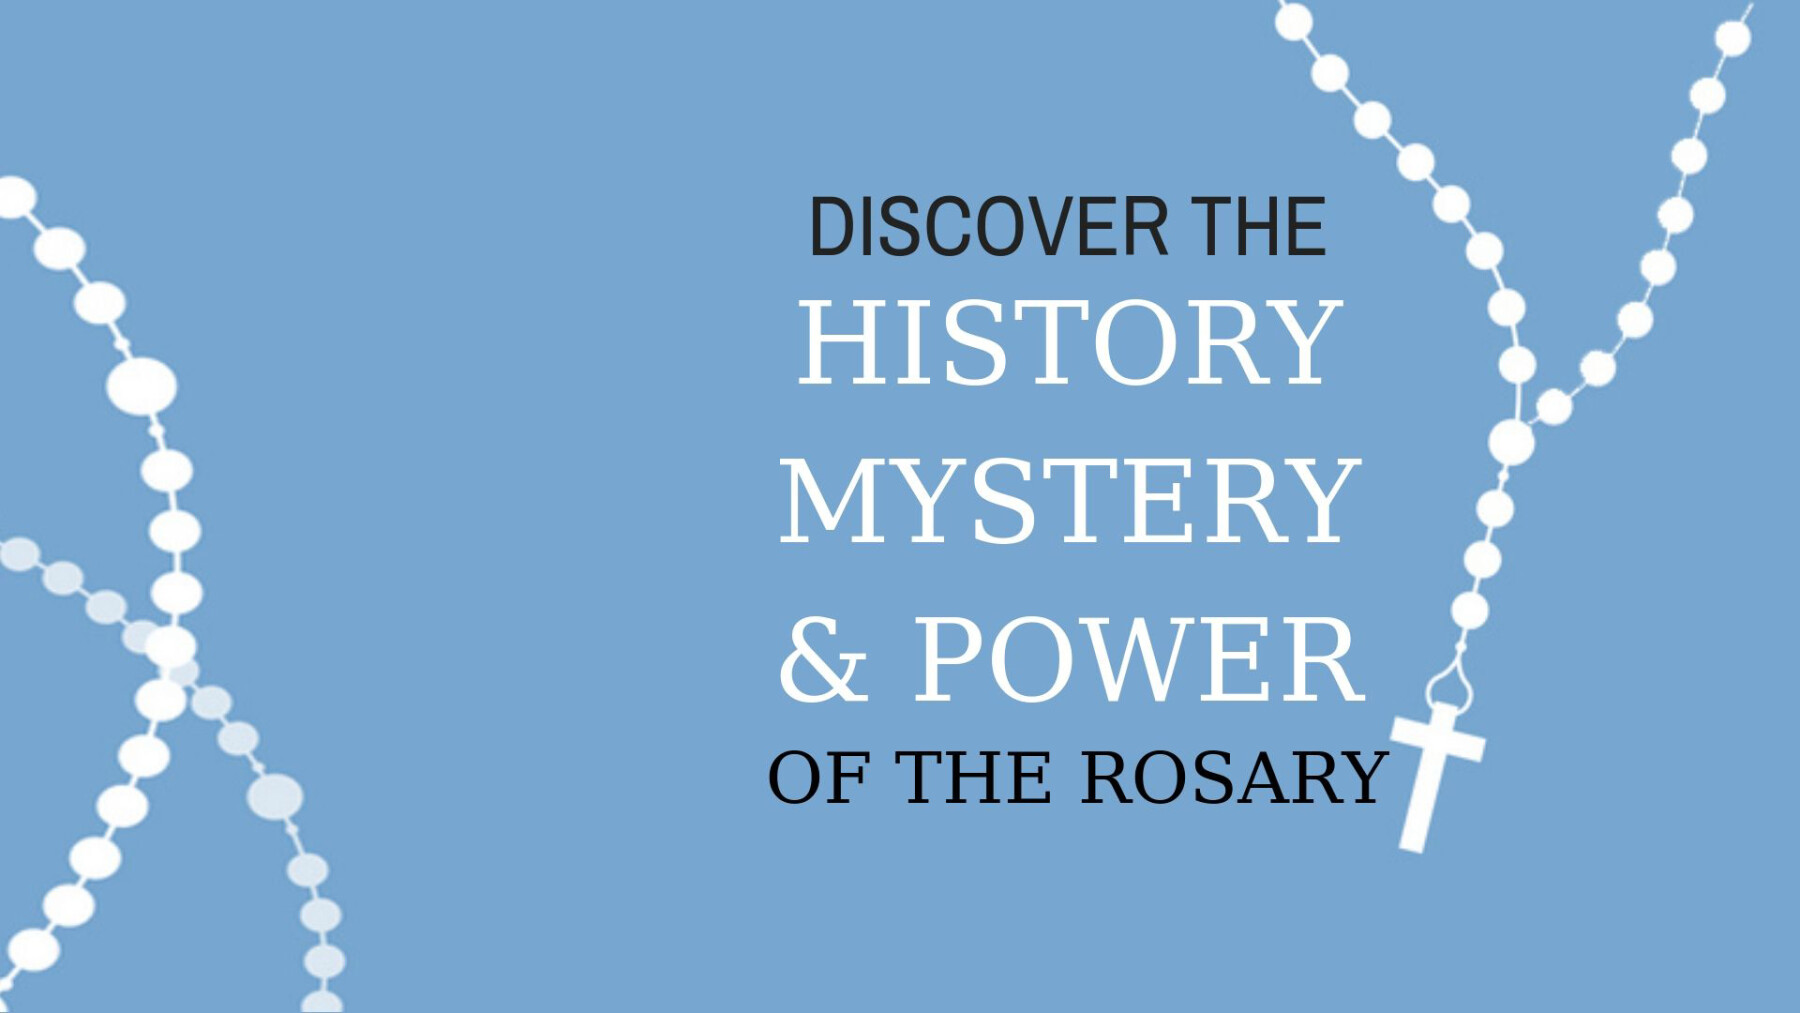 The History, Mystery, and Power of the Rosary